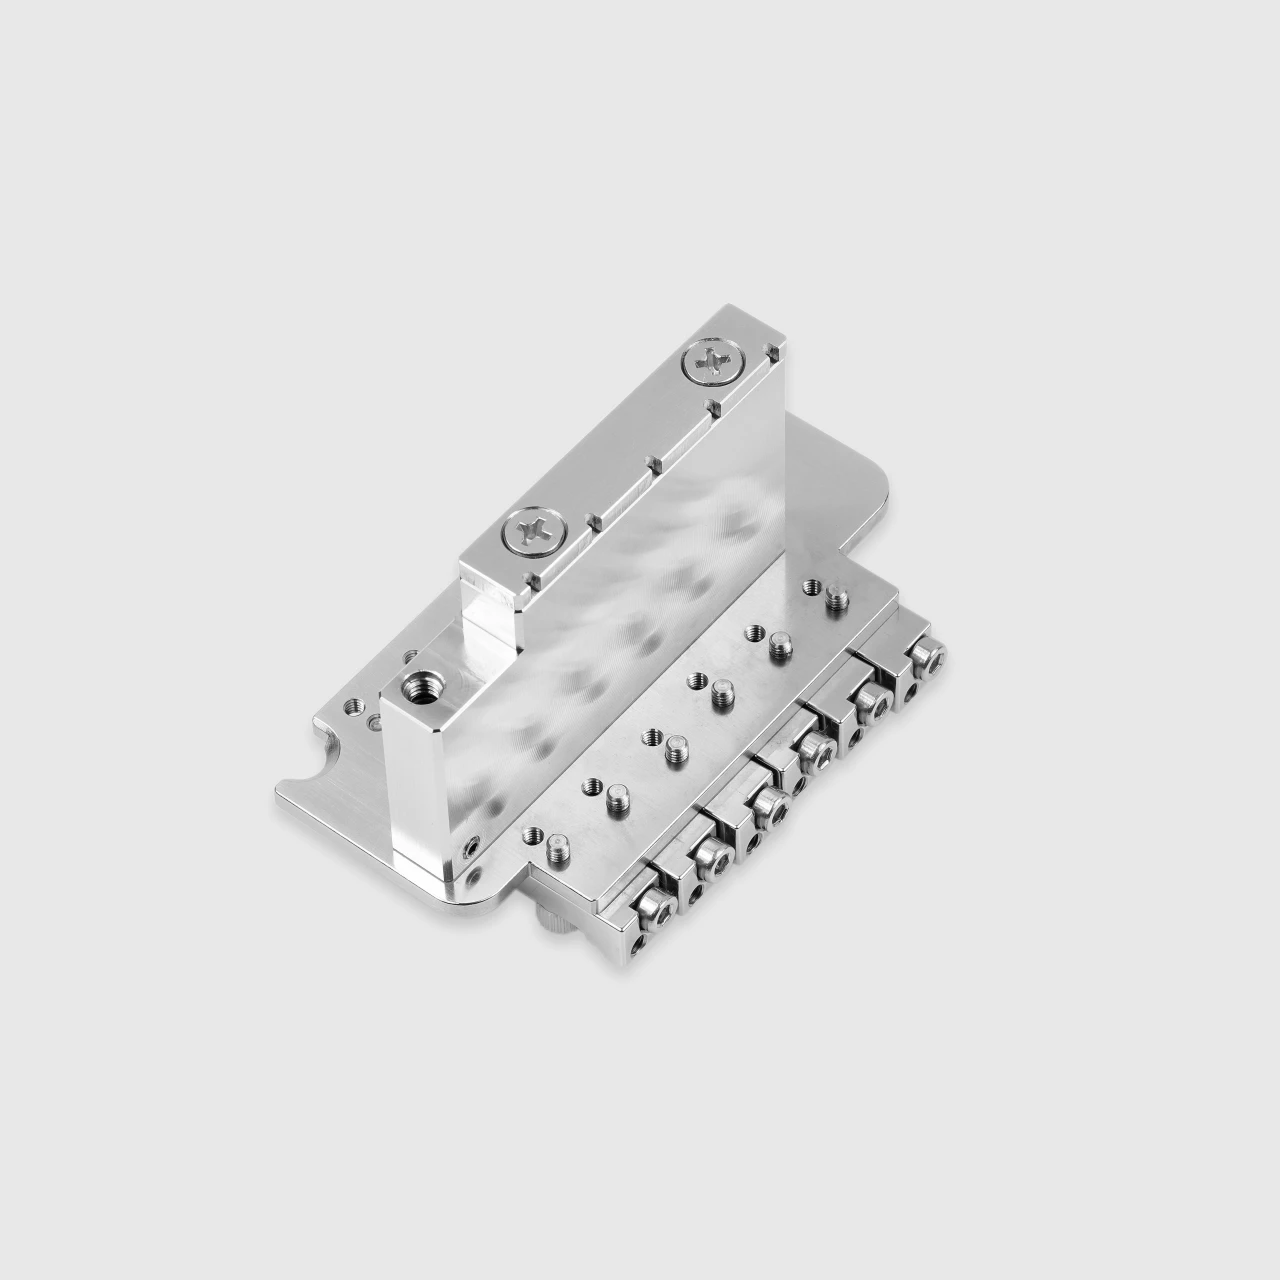 <img src=”Tremoline-Tremolo-system-flat-top-FT36T-R3-SP_5” width="1280" height="1280" alt=”tremolo unit of the Tremoline FT36T double locking tremolo from below” />